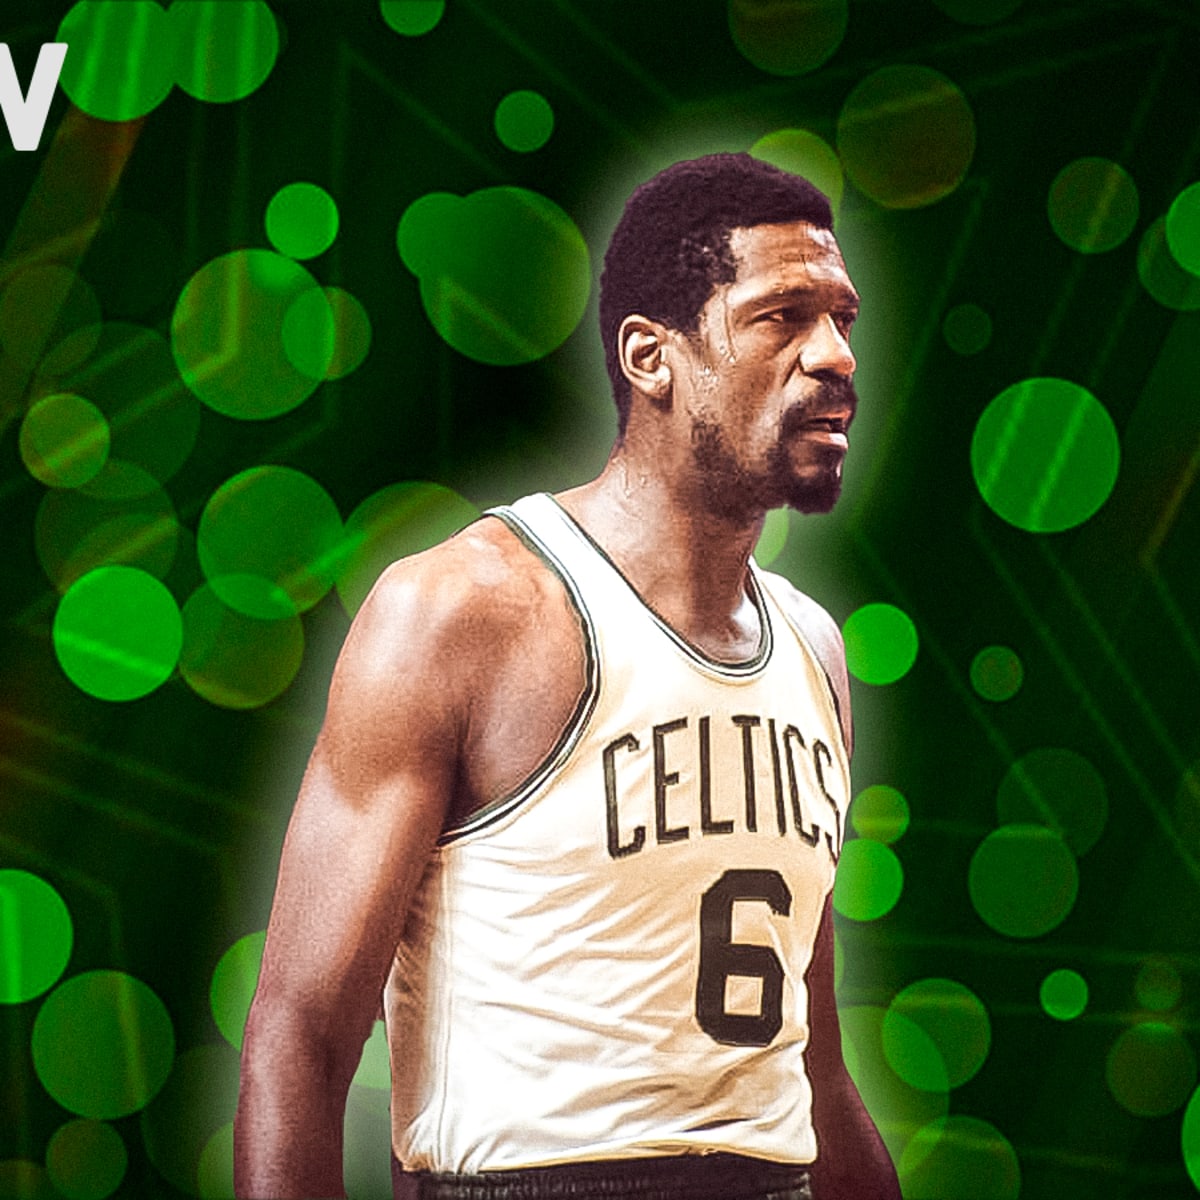 NBA retires Bill Russell's No. 6 jersey permanently leaguewide